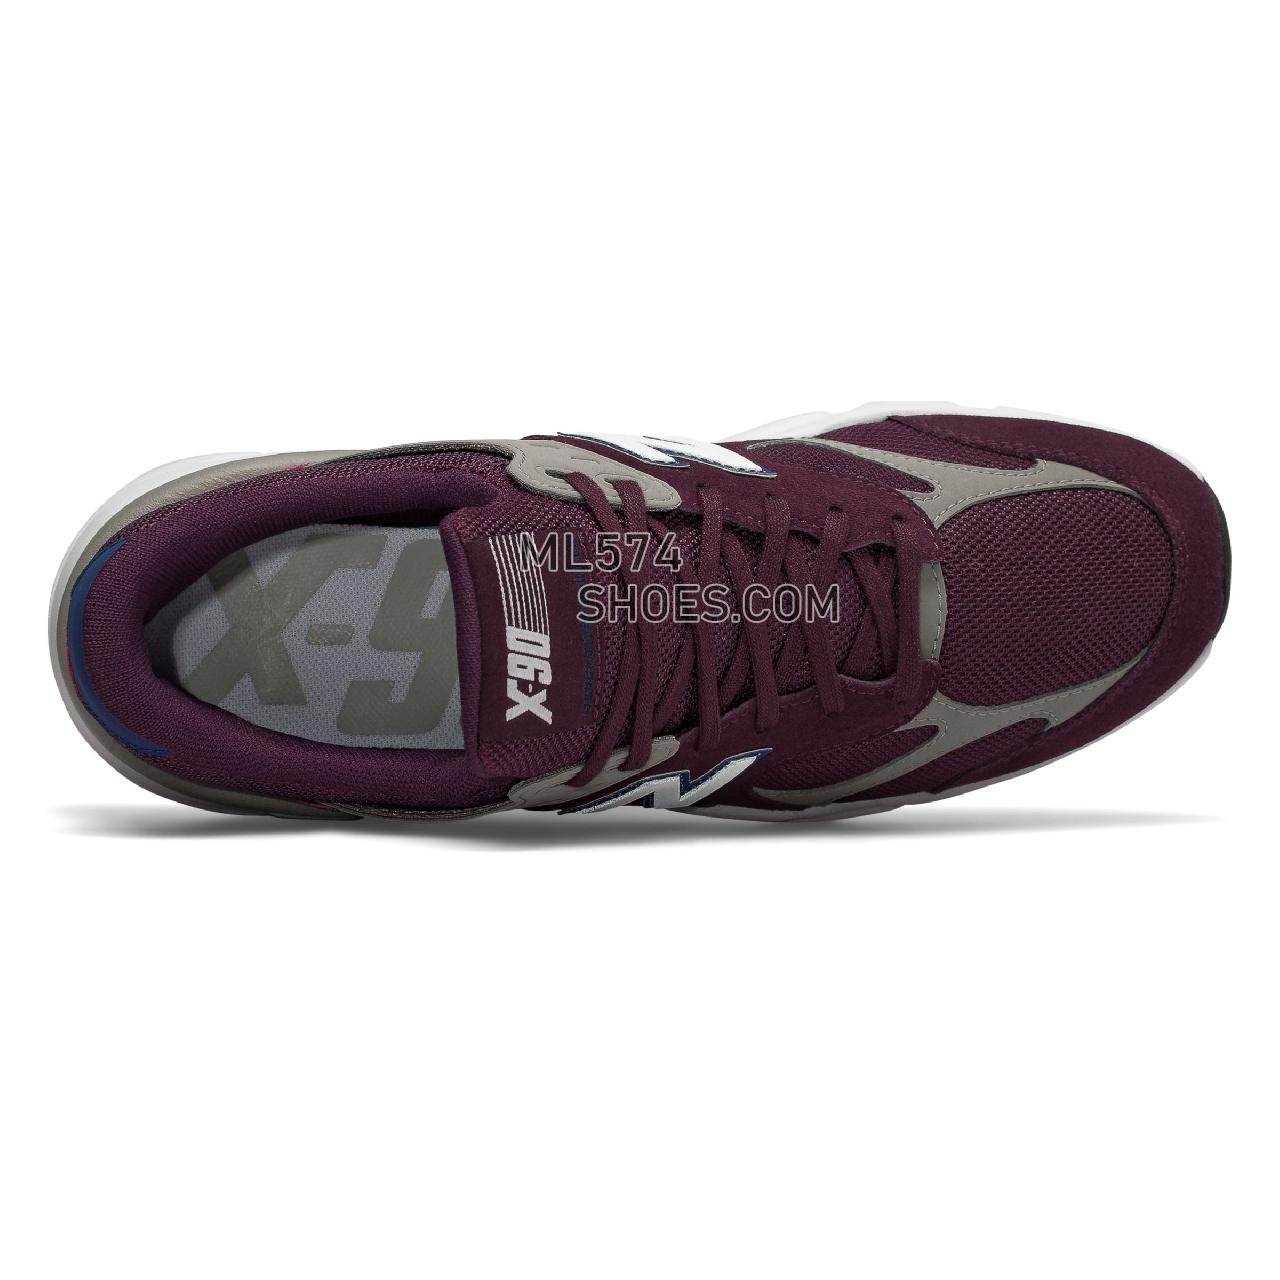 New Balance X-90 - Men's Sport Style Sneakers - Dark Currant with Team Away Grey - MSX90RCF